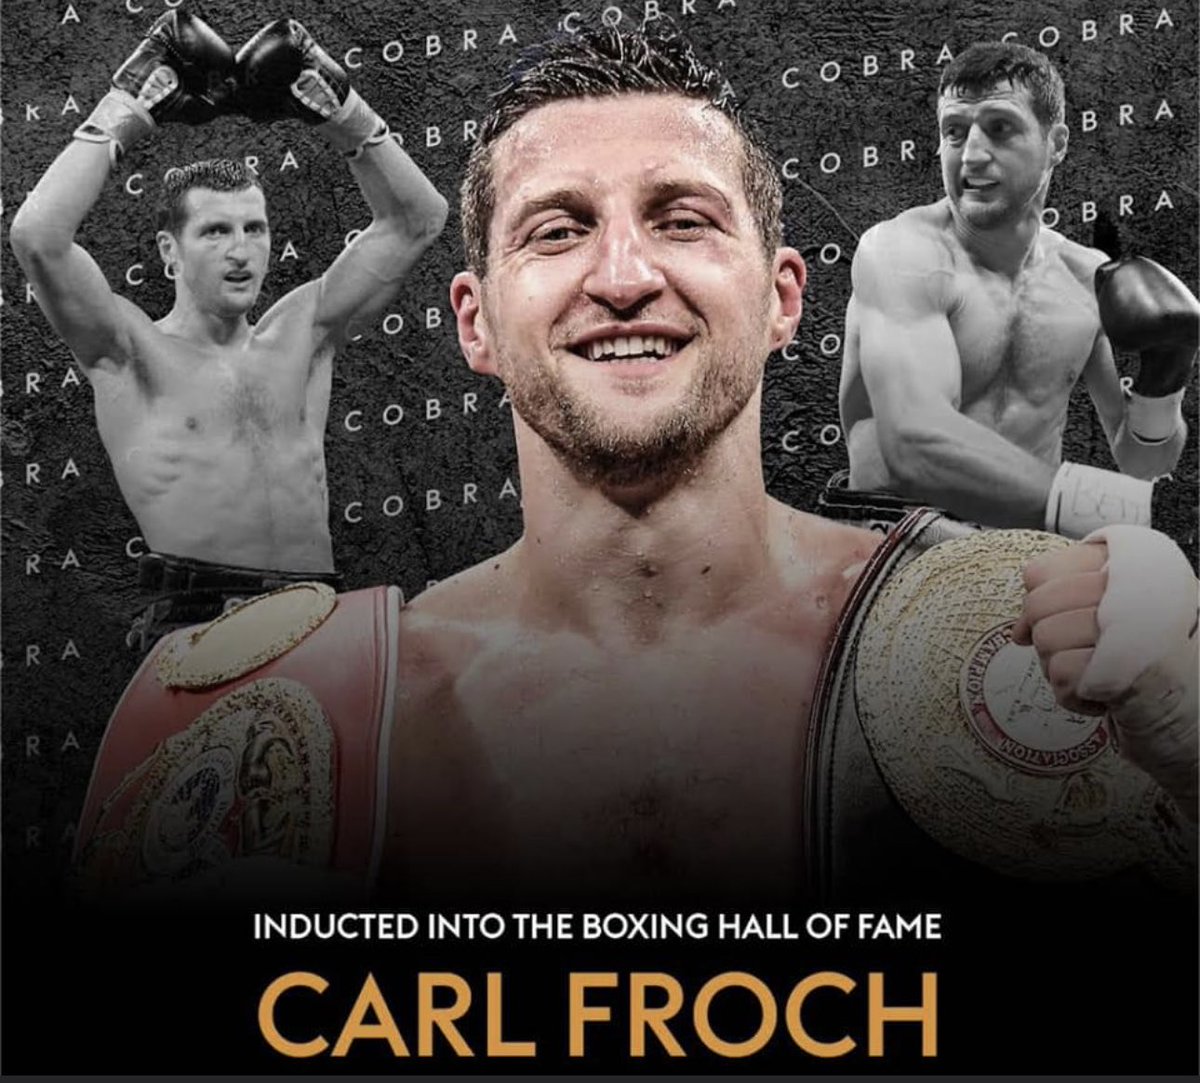 Congratulations to our @BrainsBio ambassador @Carl_Froch on his induction into the International Boxing Hall of Fame 🥊! Well deserved, Carl! 👏🏼 ⭐️